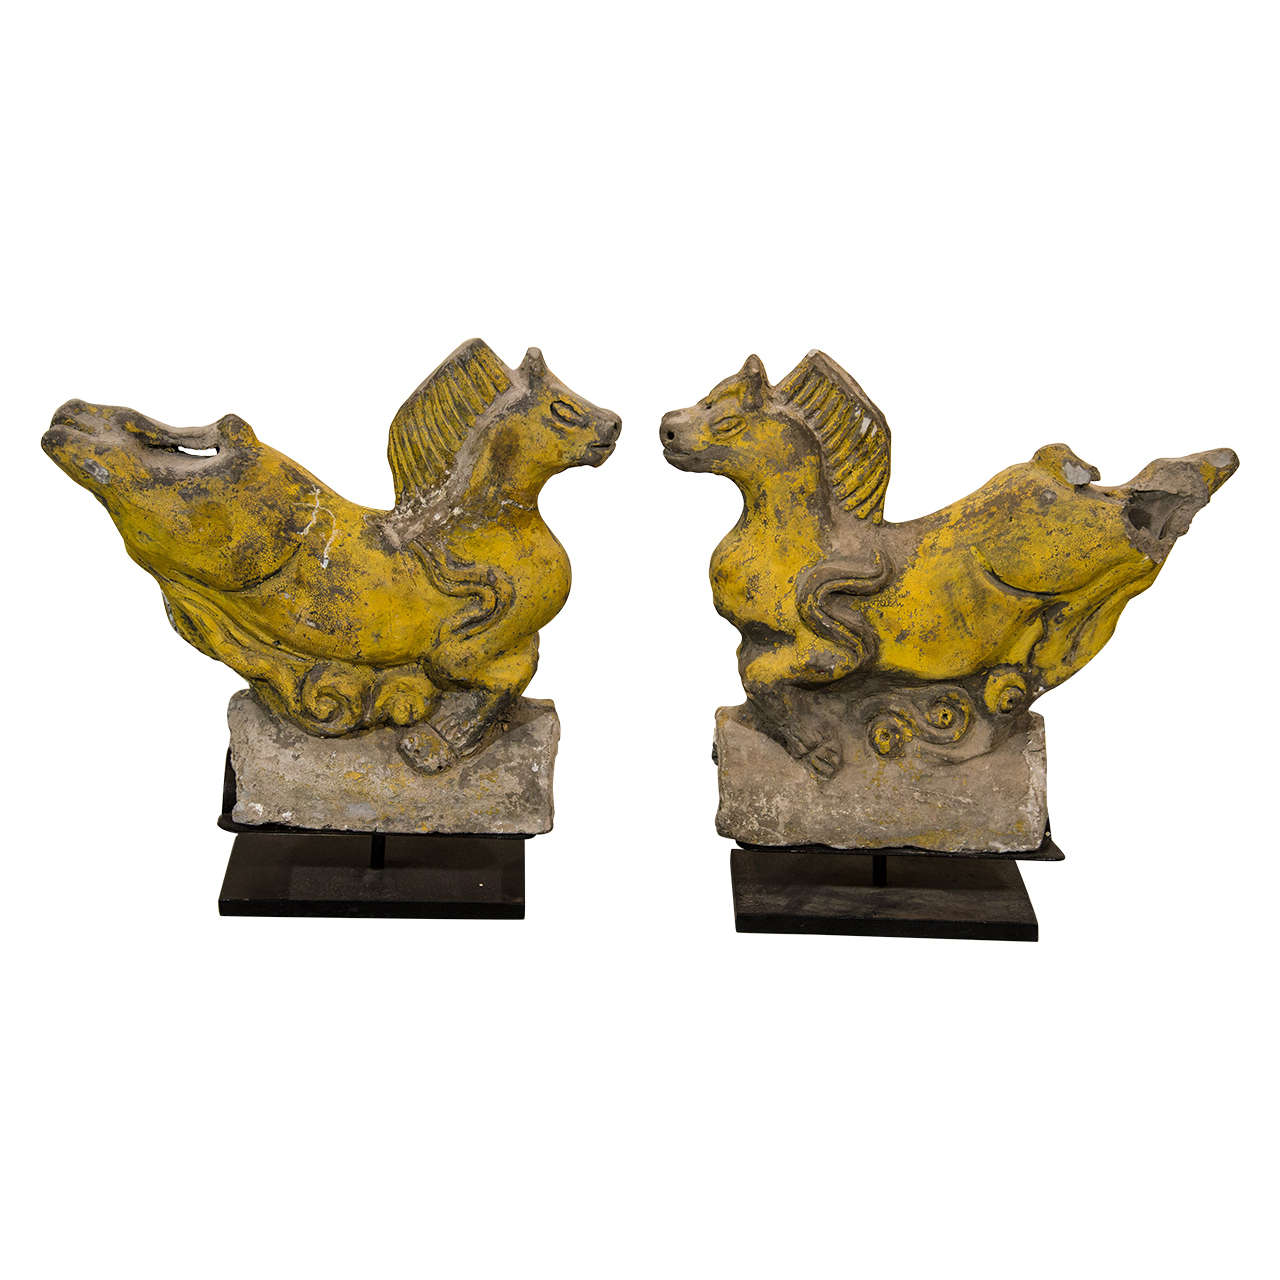 Pair of 17th Century Chinese Horse Roof Tiles